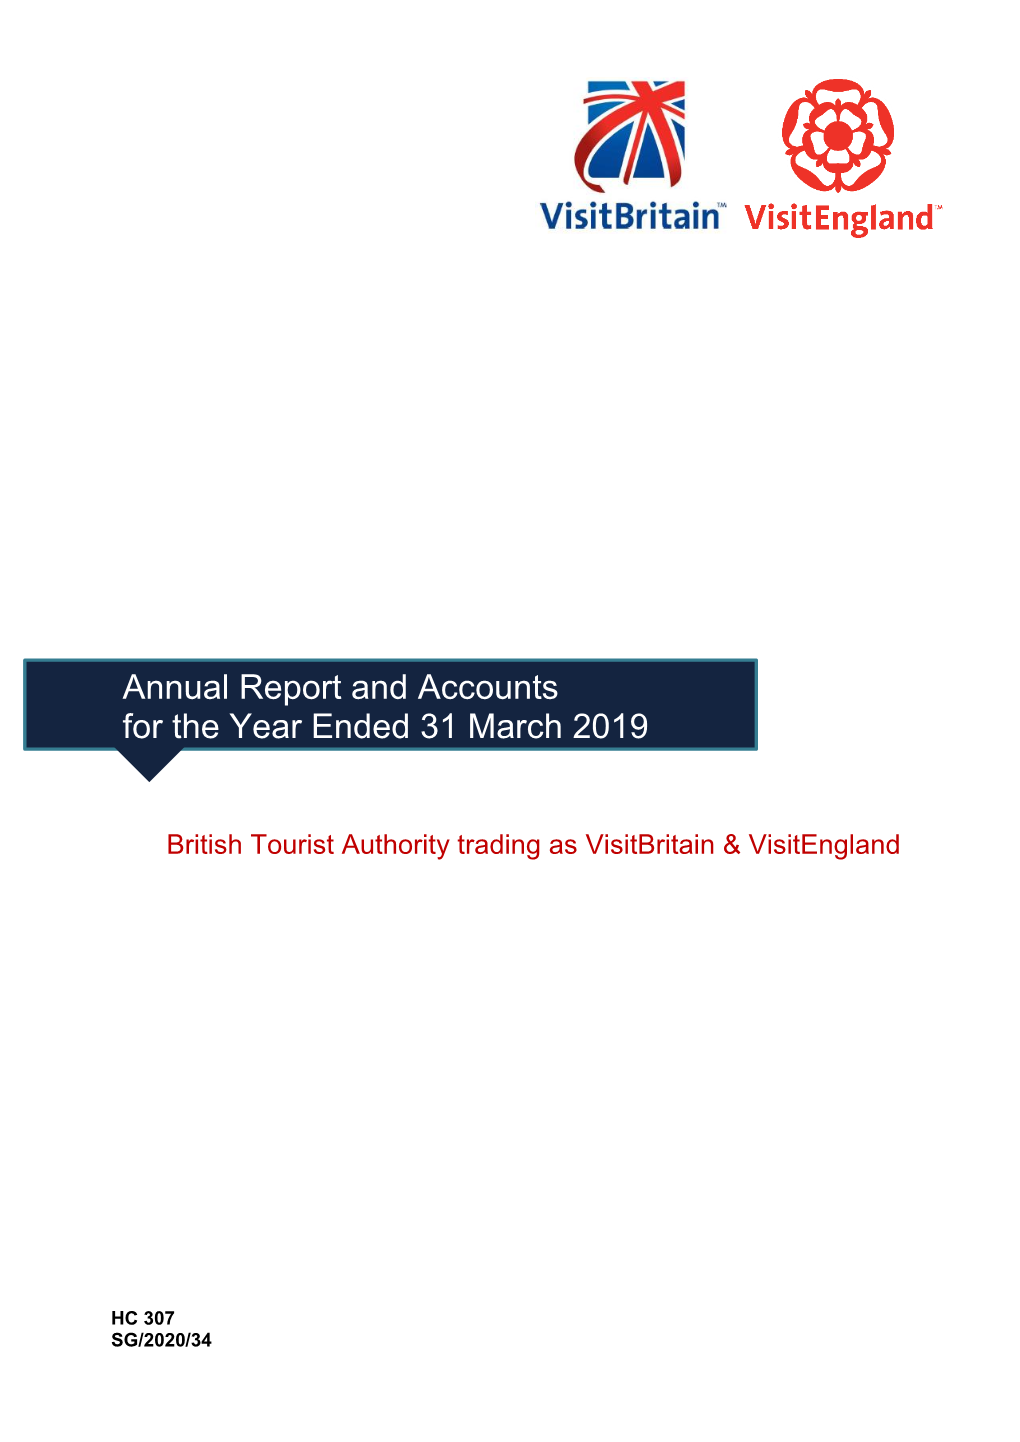 Annual Report and Accounts for the Year Ended 31 March 2019